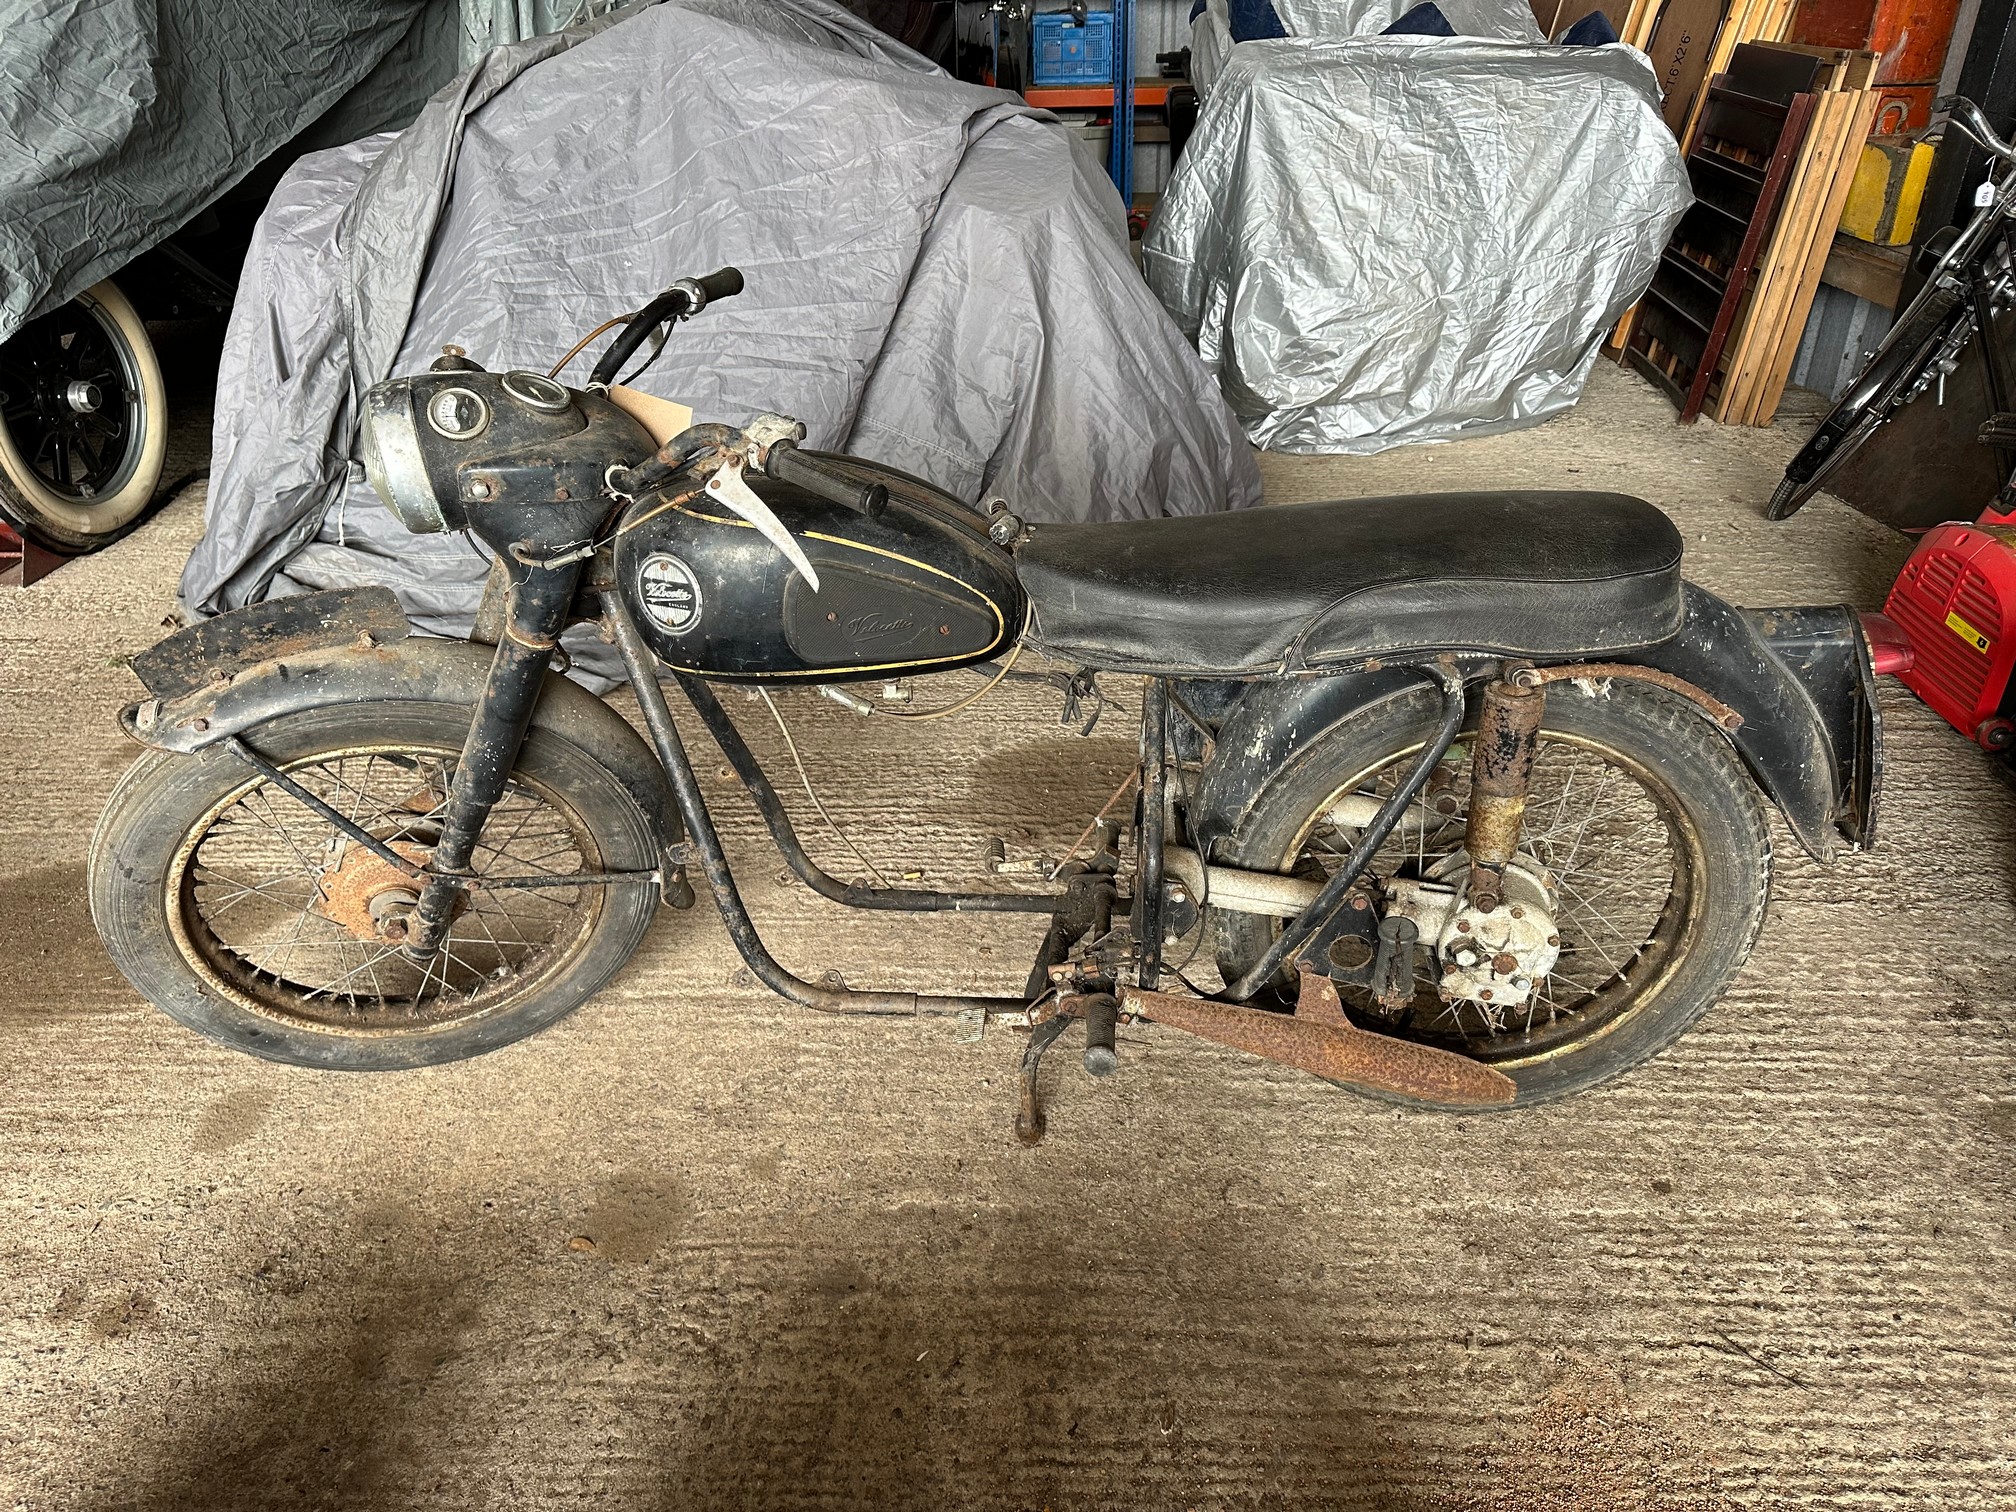 1960 VELOCETTE VALIANT 192cc PROJECT - Image 2 of 9